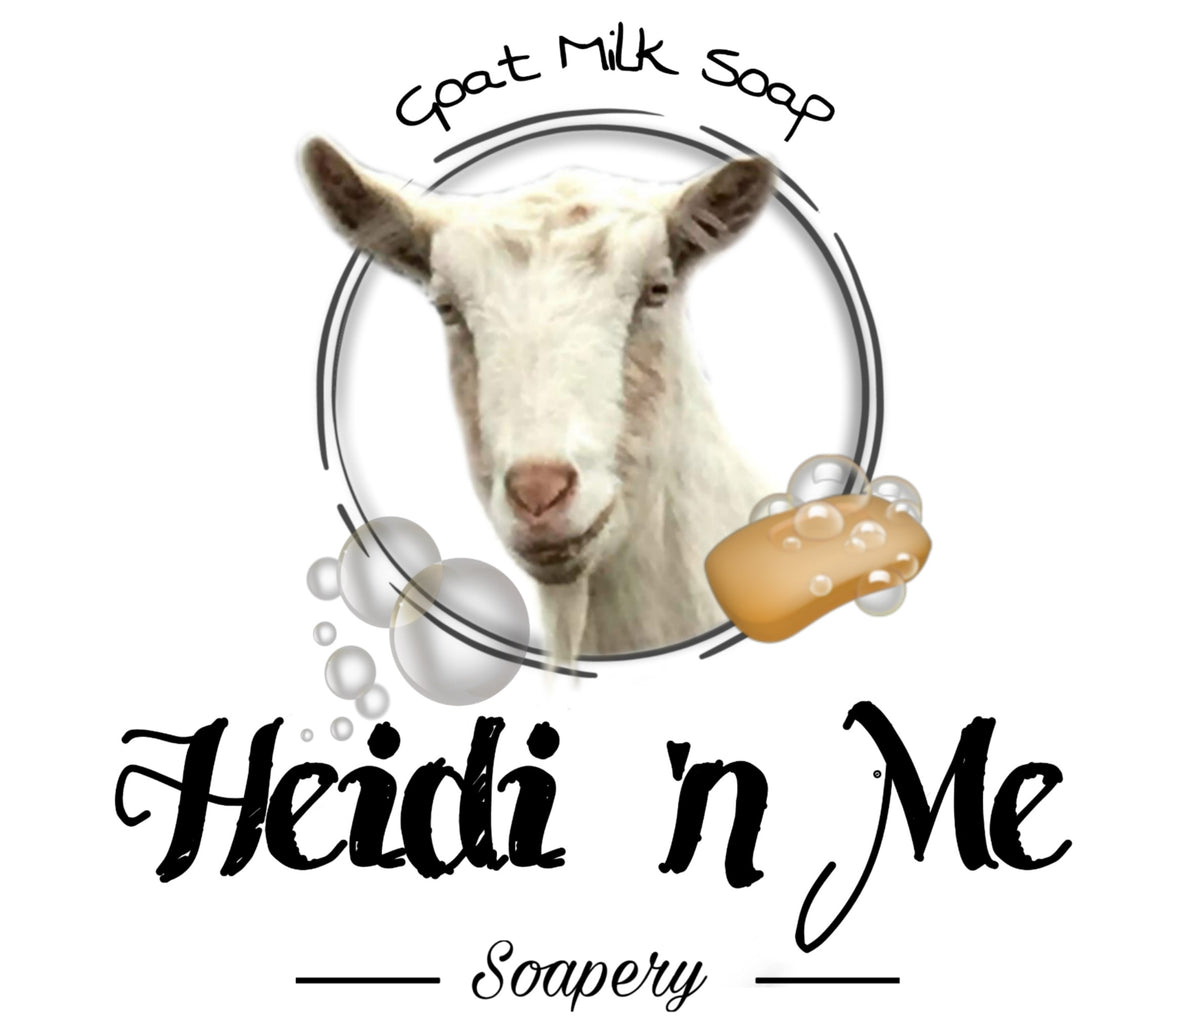 Goat milk soap handcrafted artisan soap made using fresh goat milk, and other natural and organic ingredients.  Local honey, ethically harvested Shea butter and cocoa butter.  So lather up and enjoy this skin loving experience. 